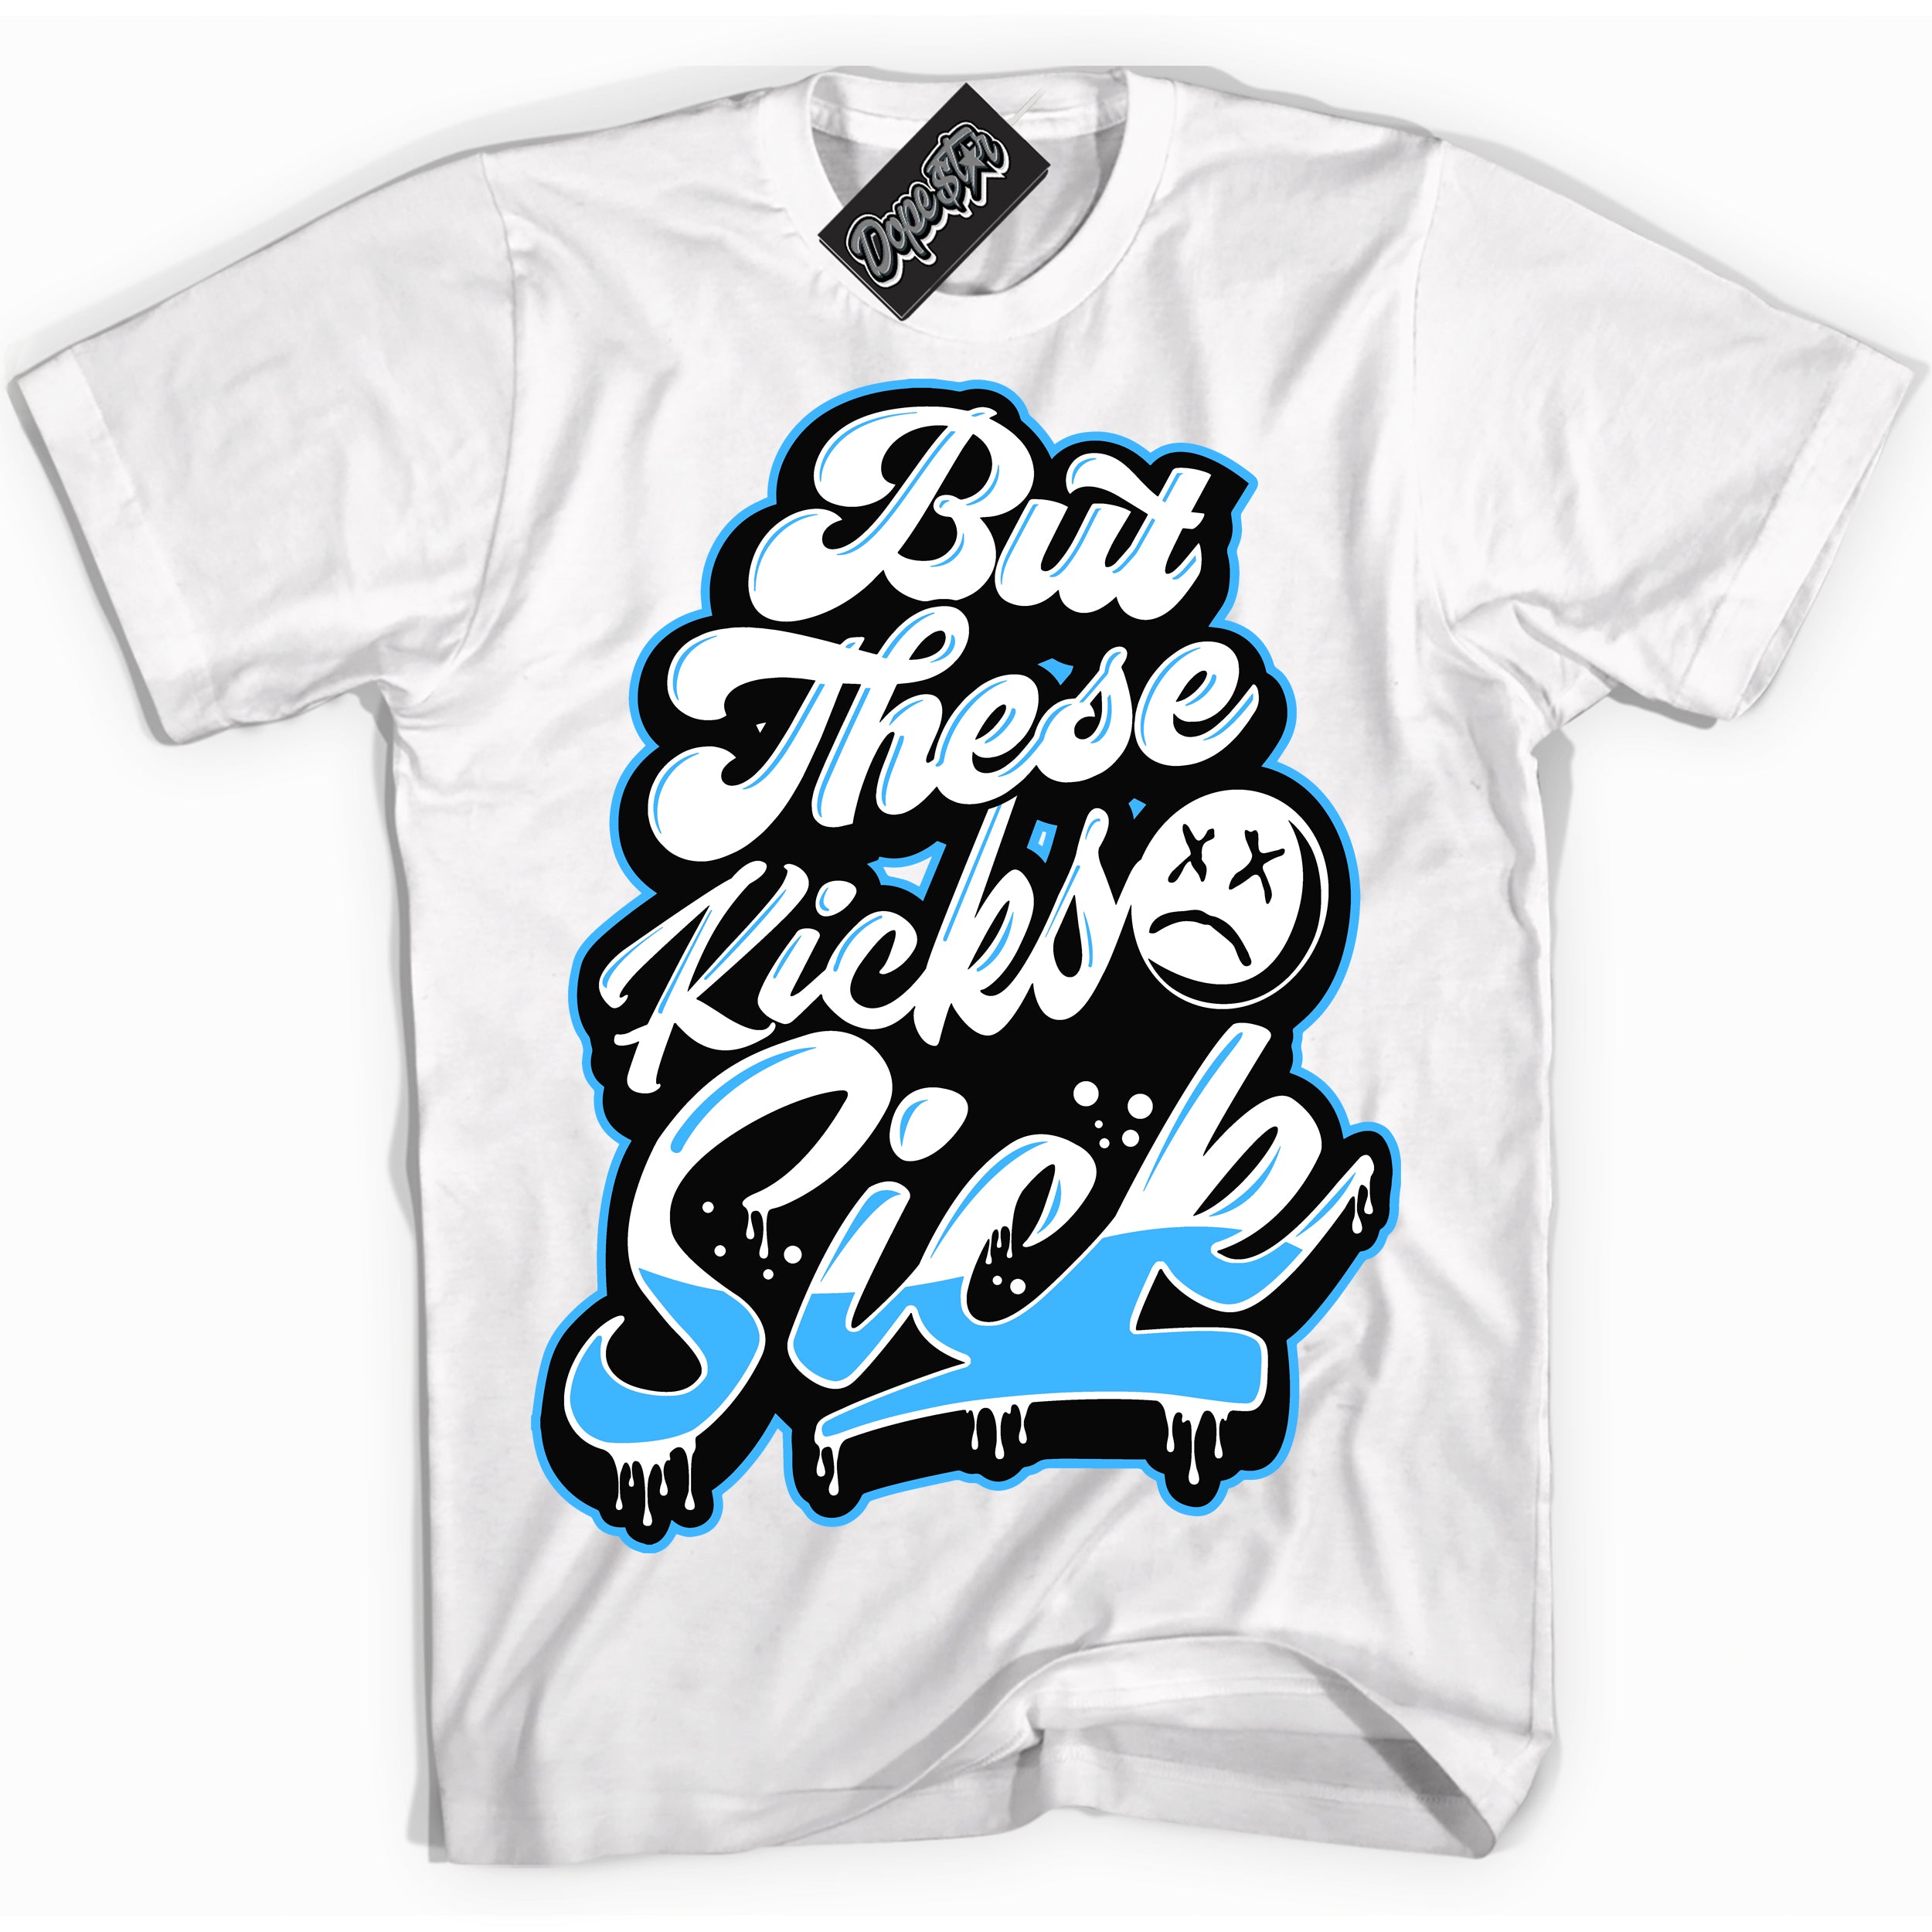 Cool White graphic tee with “ Kick Sick ” design, that perfectly matches Powder Blue 9s sneakers 